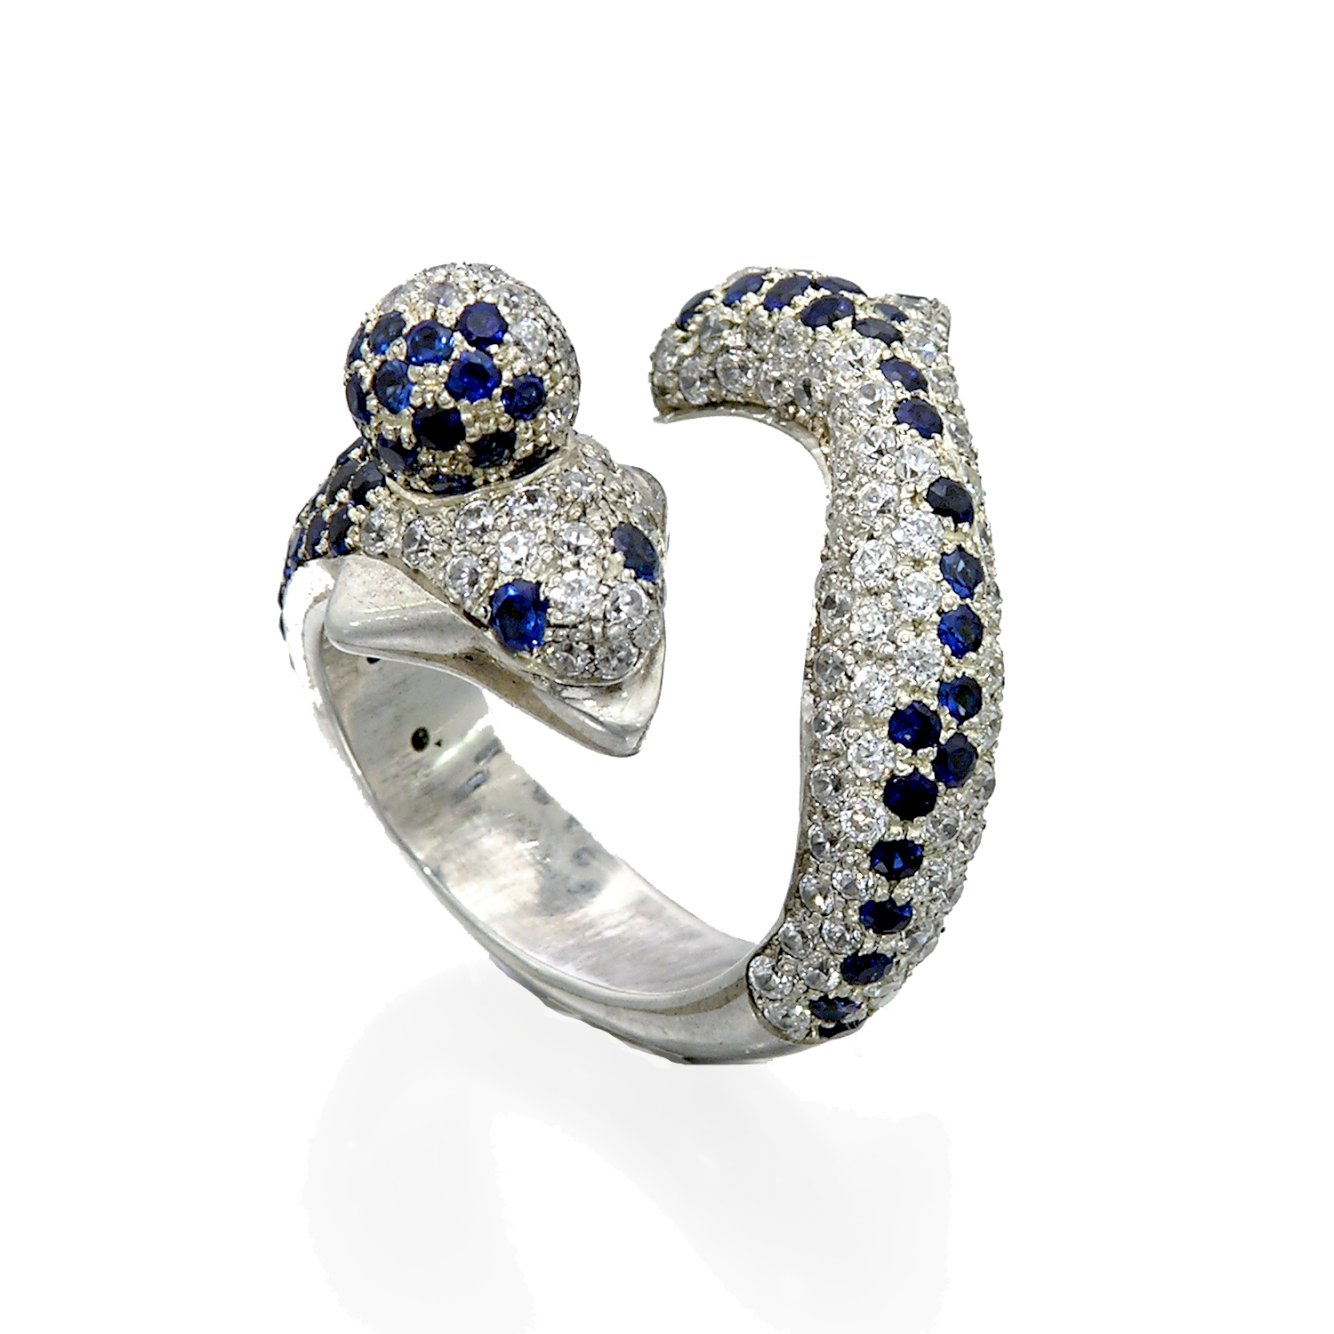 Dolphin Ring with a Ball - set with Diamonds and Blue Sapphires